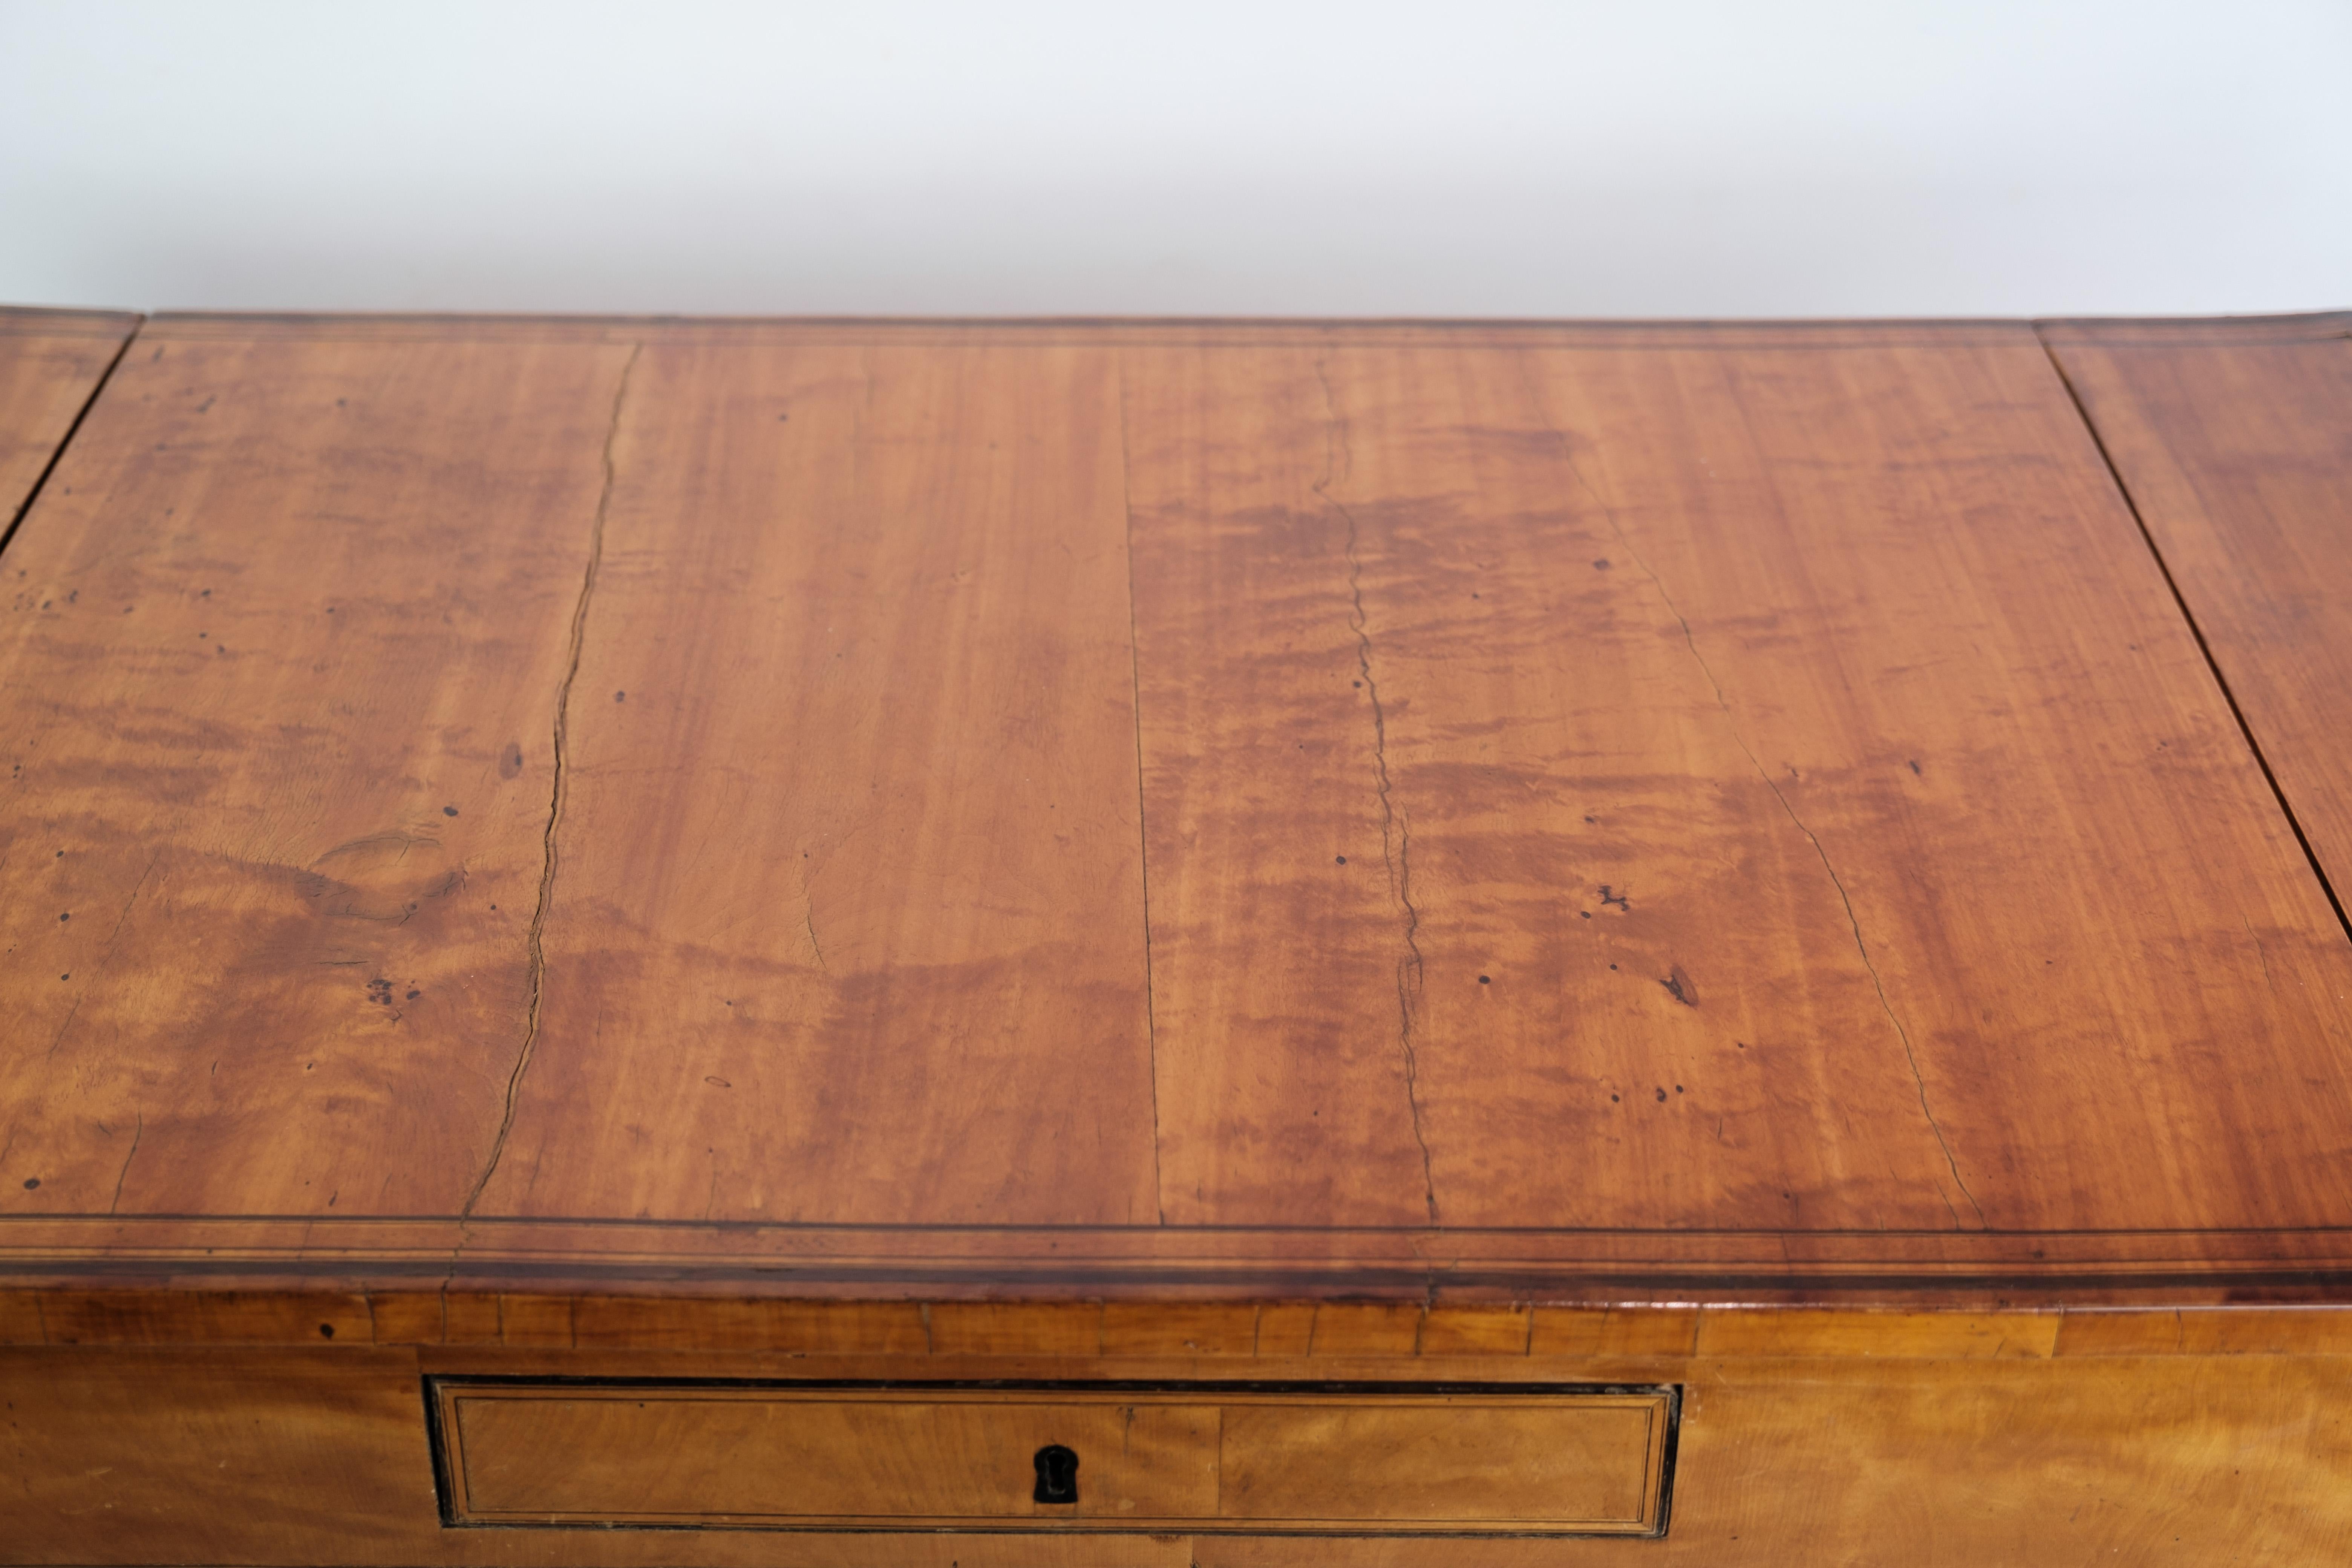 Antique Empire Table with Flaps and Marquetry in Birch Wood from 1840s For Sale 4